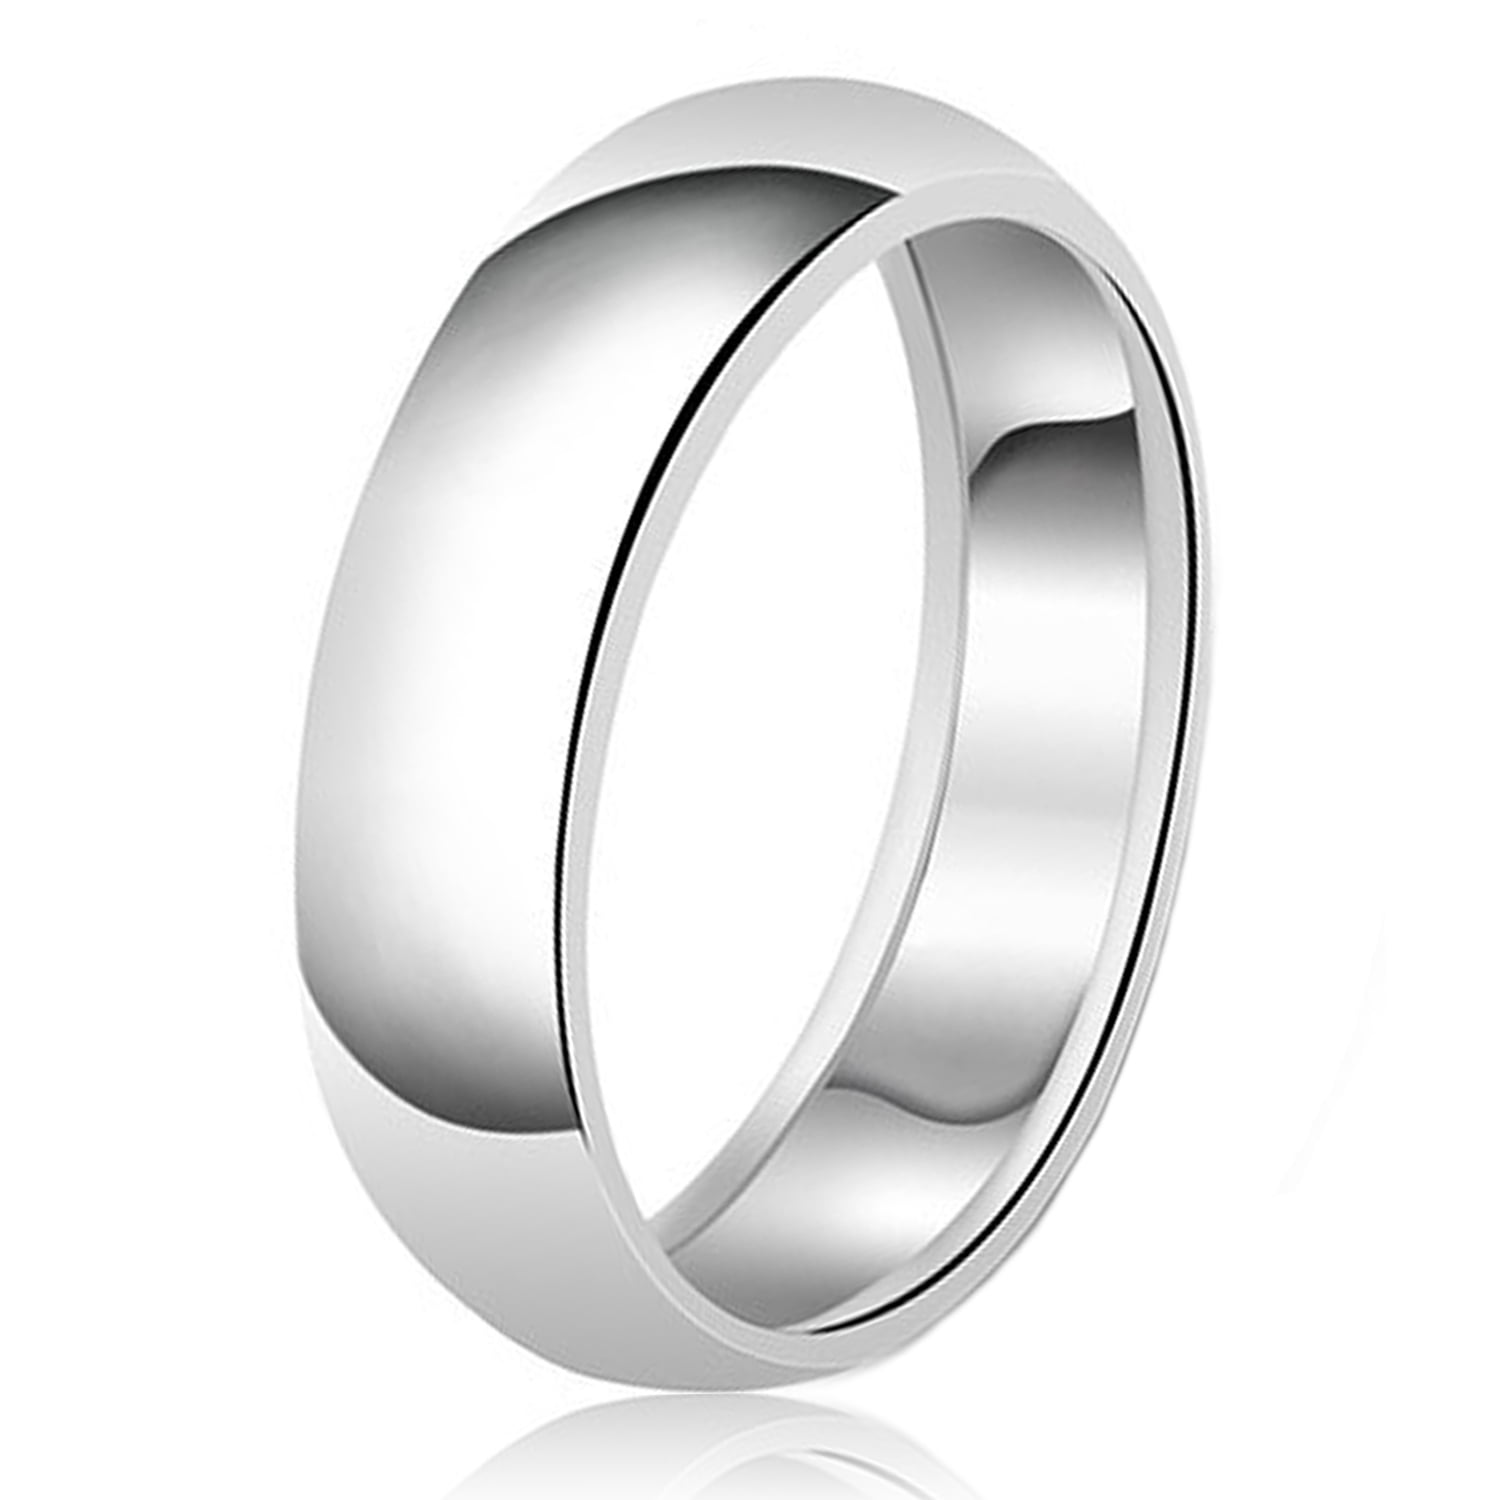 8mm Wide Pure Solid 925 STERLING SILVER Plain Wedding Band Ring MEN'S size 8-13 